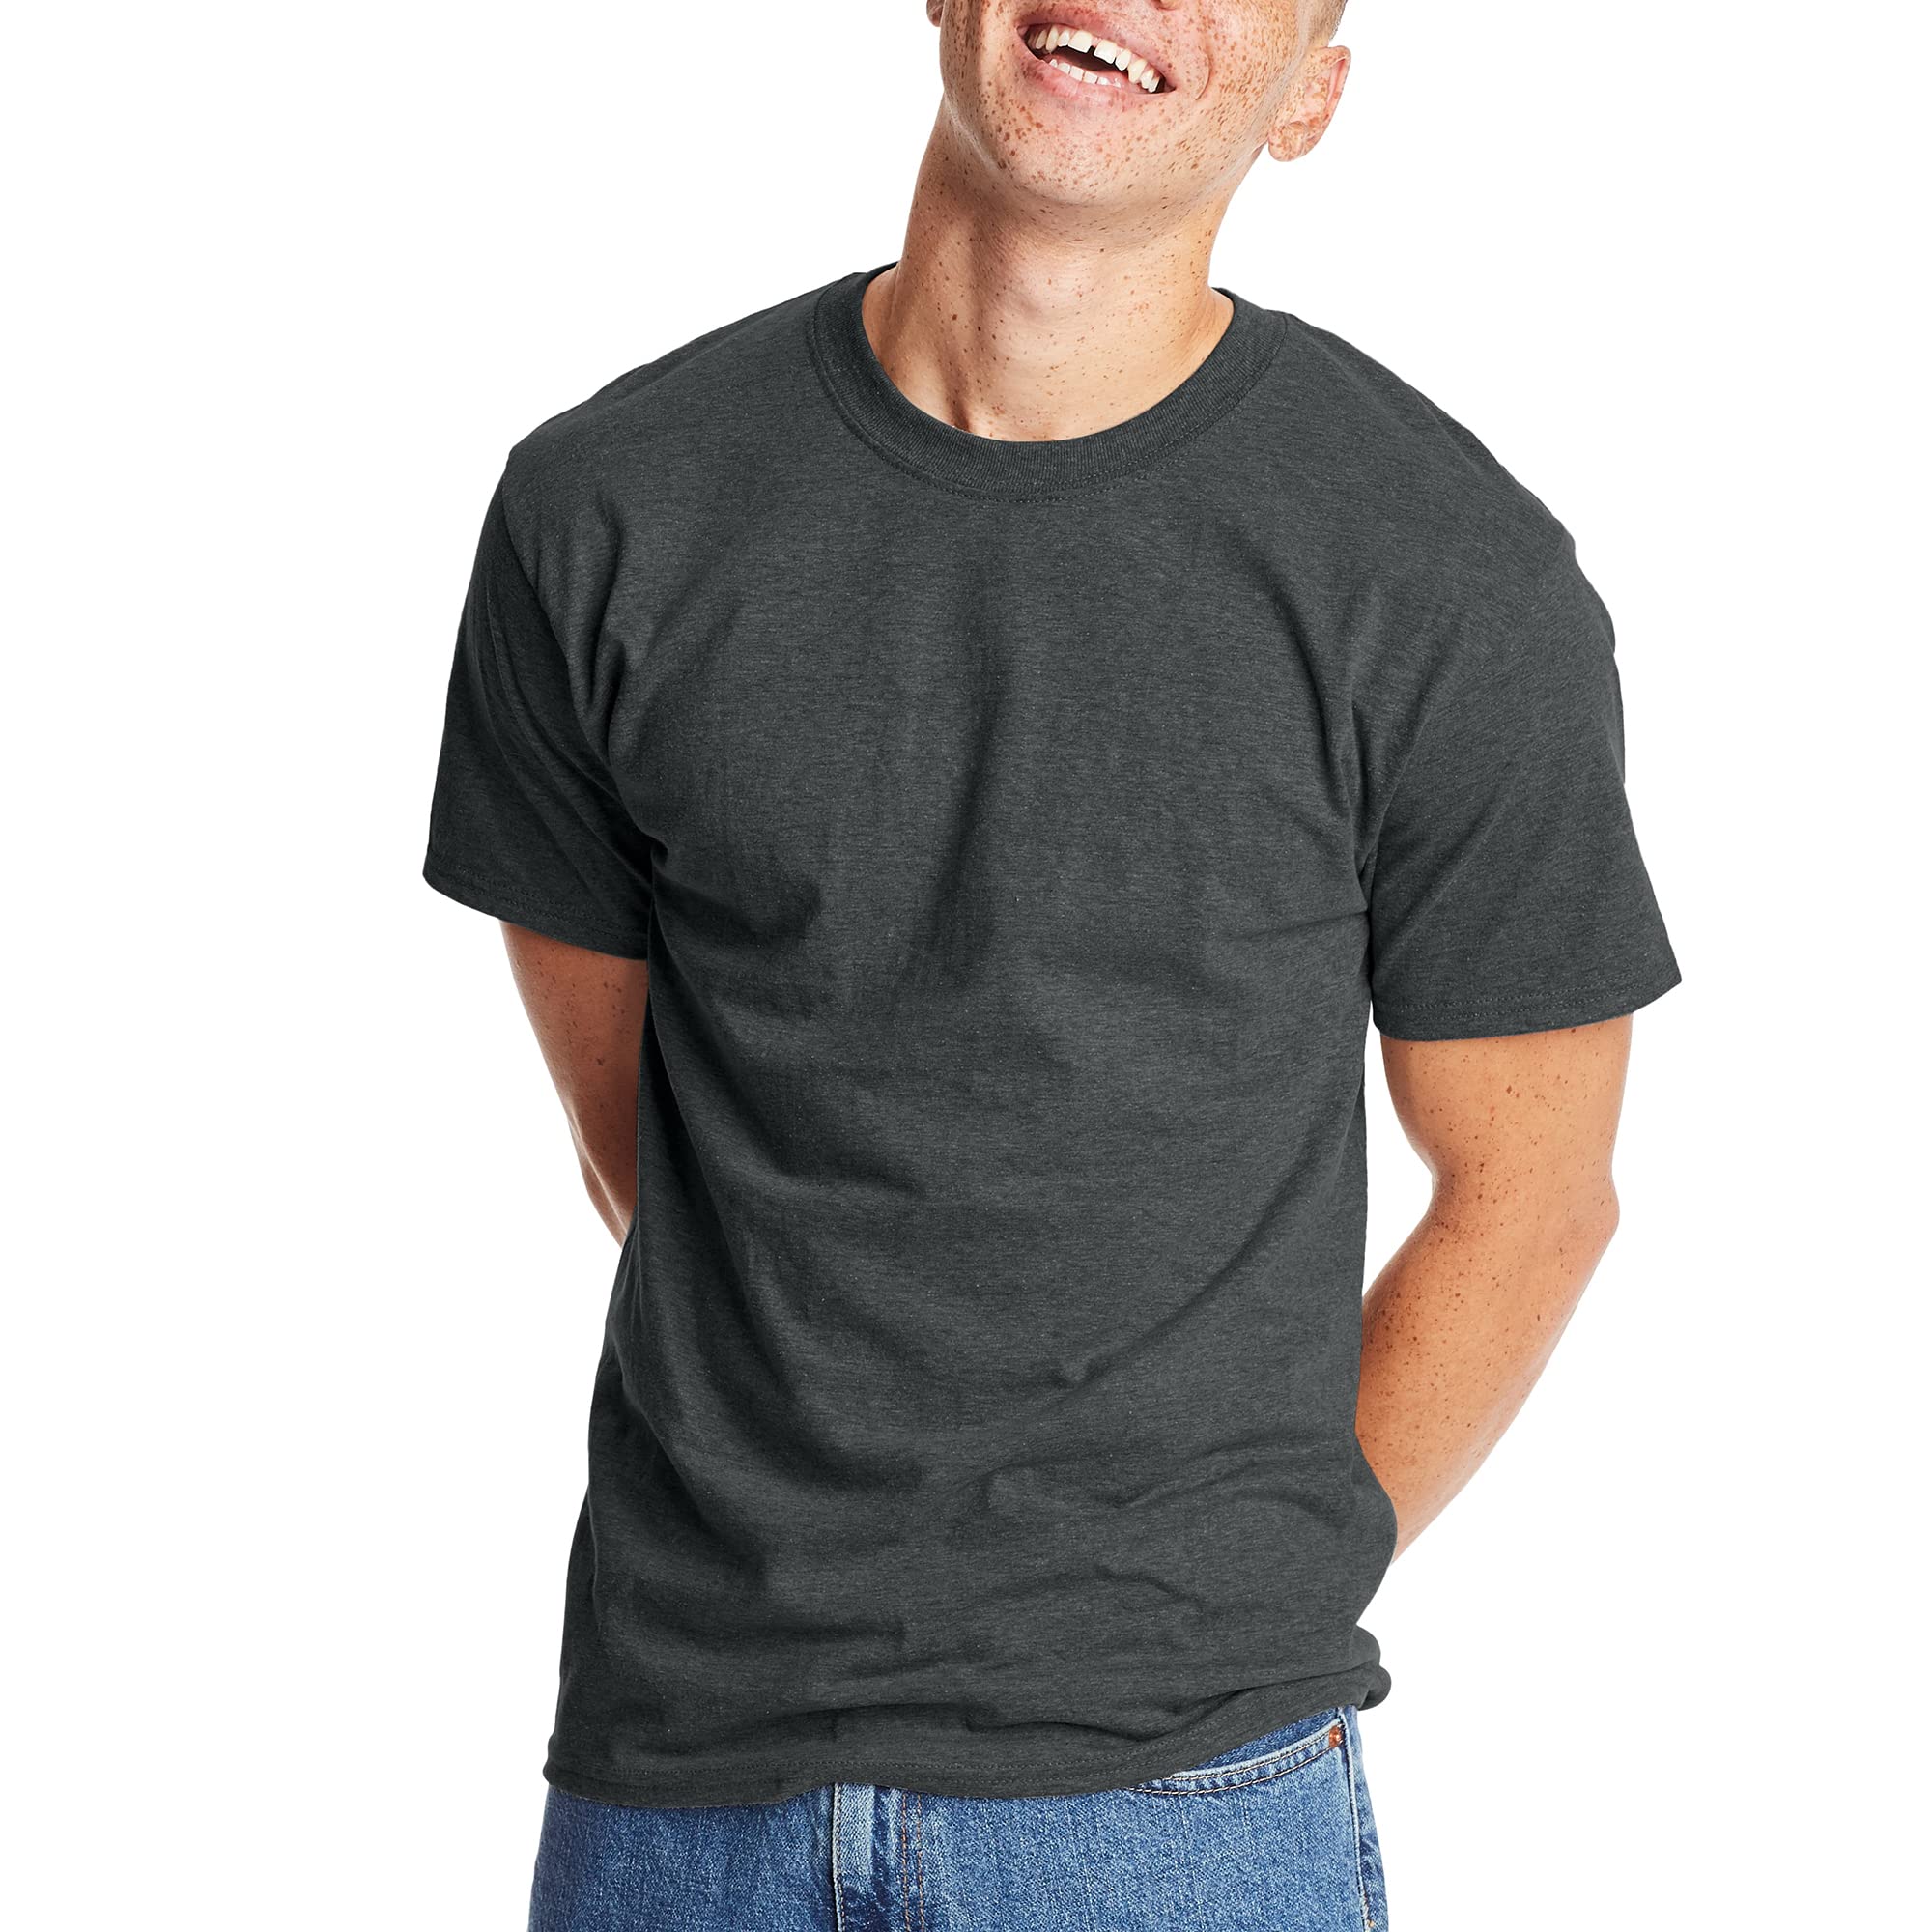 Hanes Mens Beefyt T-Shirt, Classic Heavyweight Cotton Crewneck Tee, Roomy Fit, 1 Or 2 Pack, Available in Tall